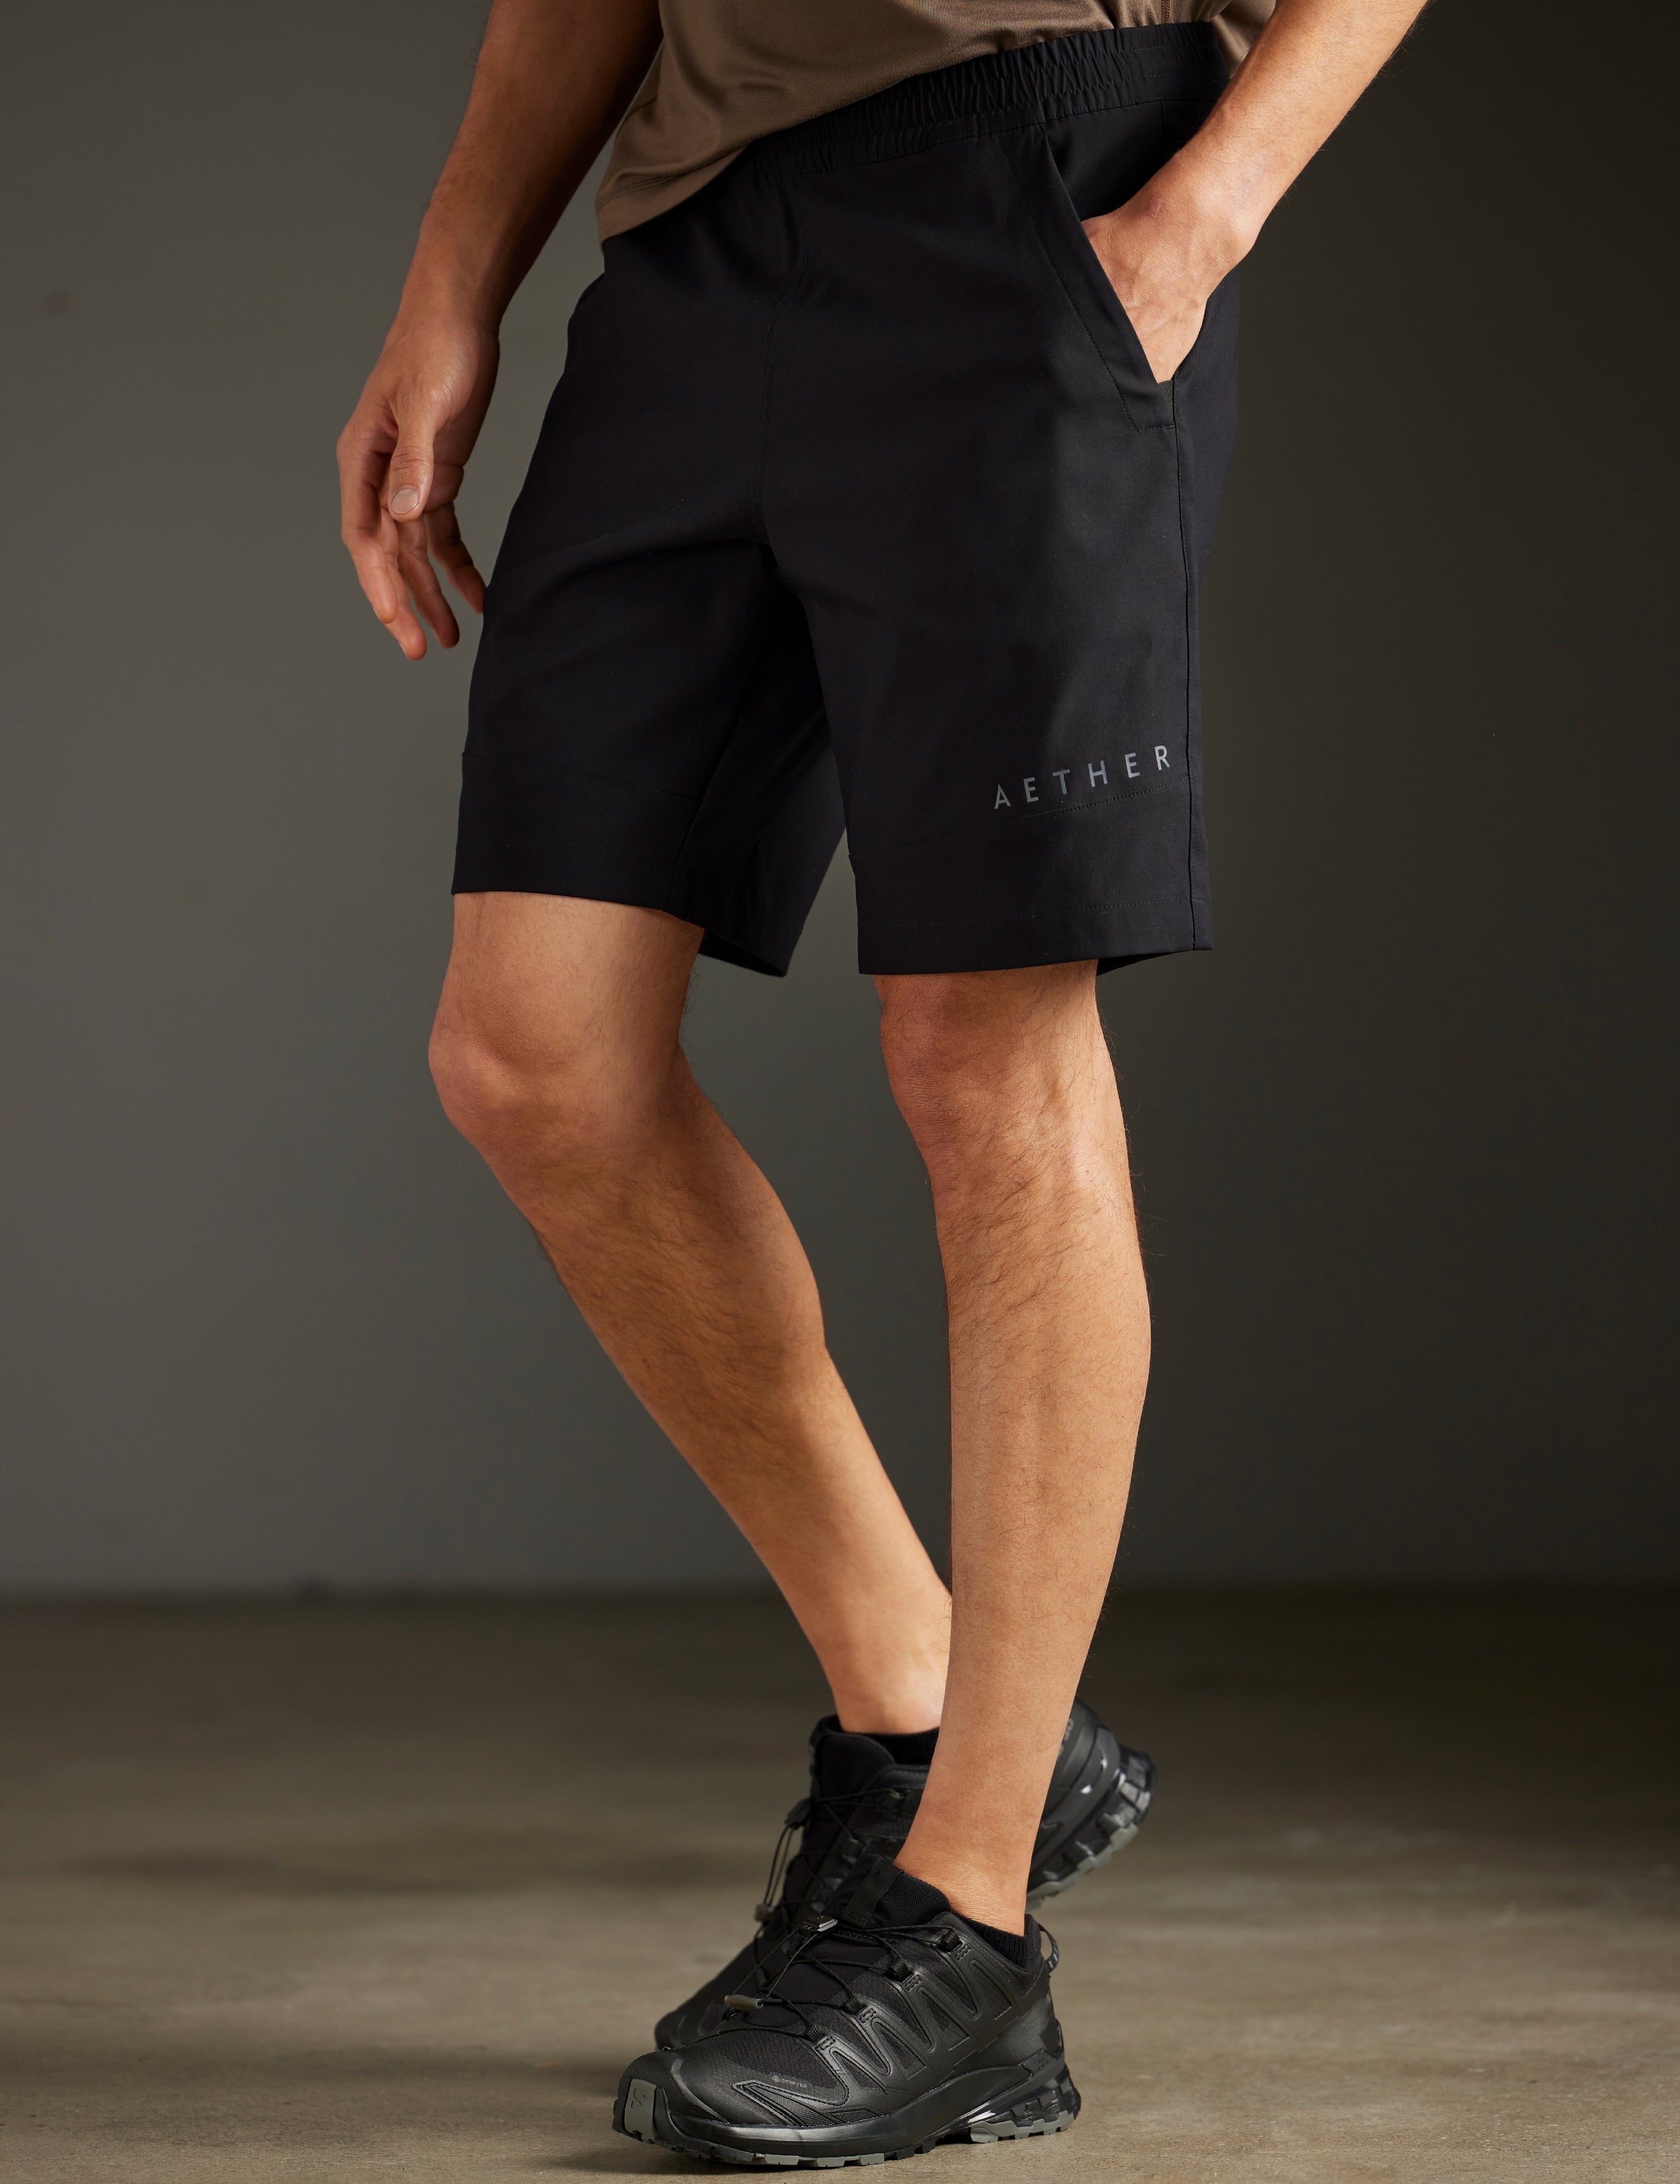 men's black shorts from AETHER Apparel